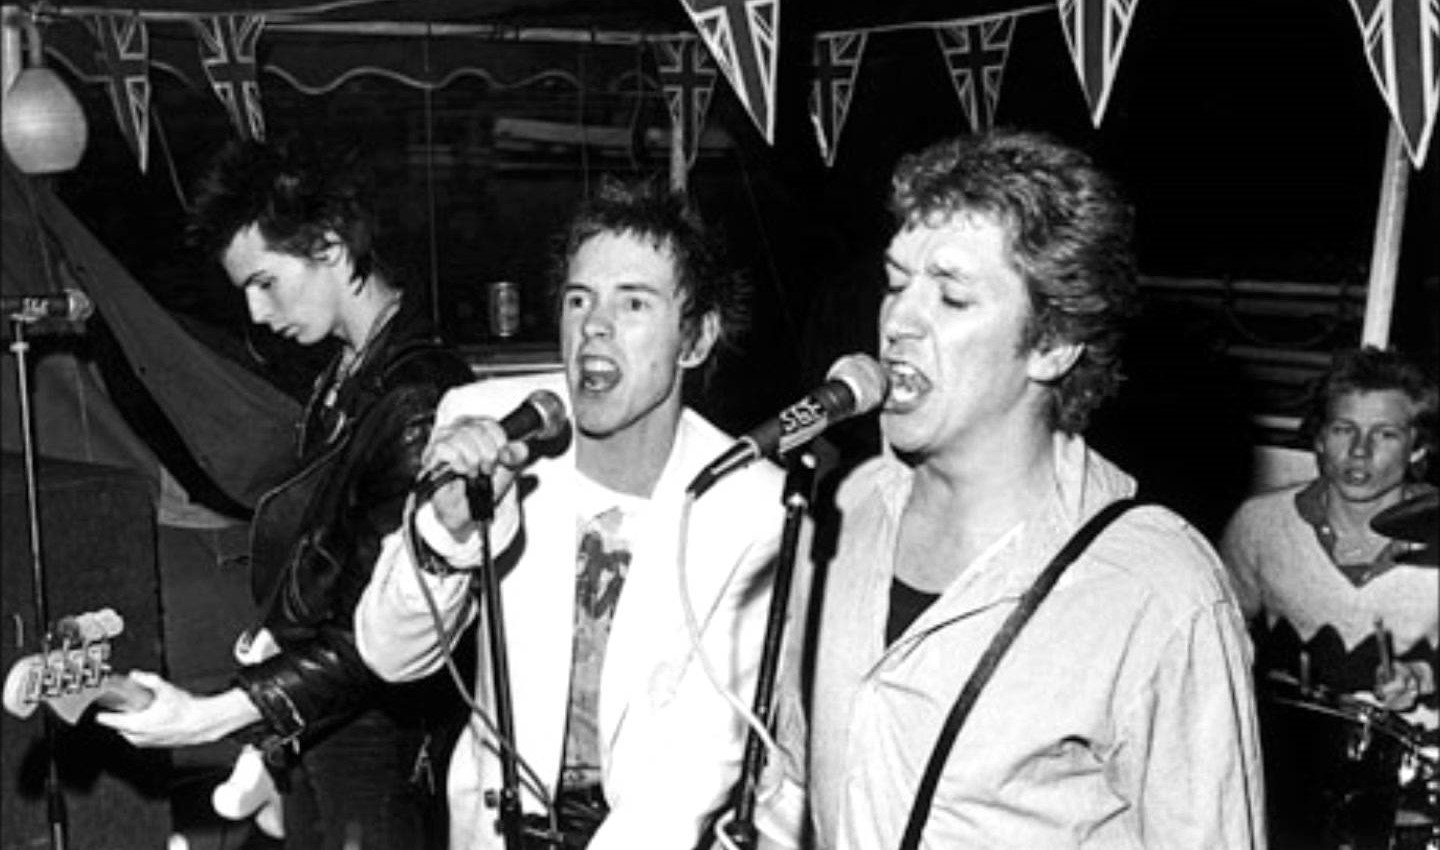 27.05.16, Worley, The Sex Pistols at Reading (Richard Boon) - Sex Pistols playing Pretty Vacant, June 7th 1977